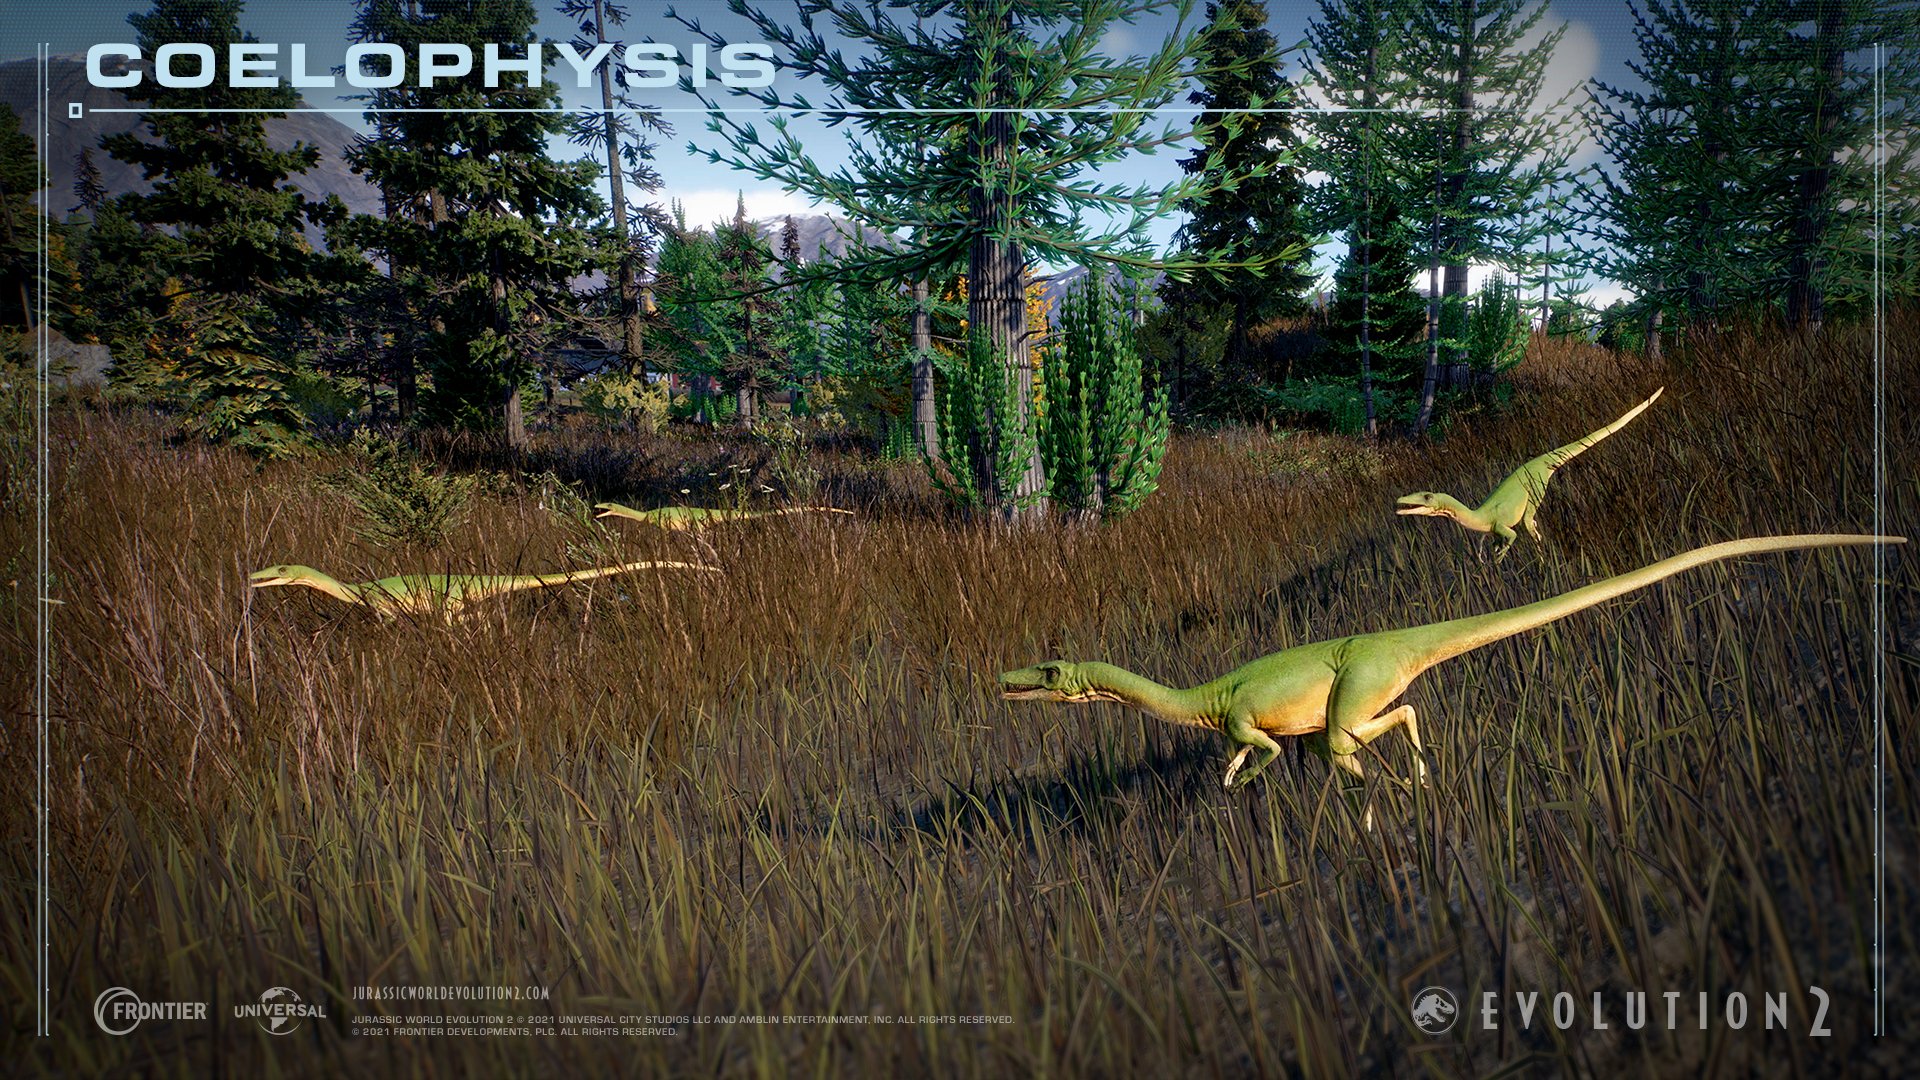 Jurassic World Evolution 2 you excited about Coelophysis in Jurassic World Evolution 2? Coelophysis was first discovered in New Mexico in 1881 by an amateur fossil collector. It sits